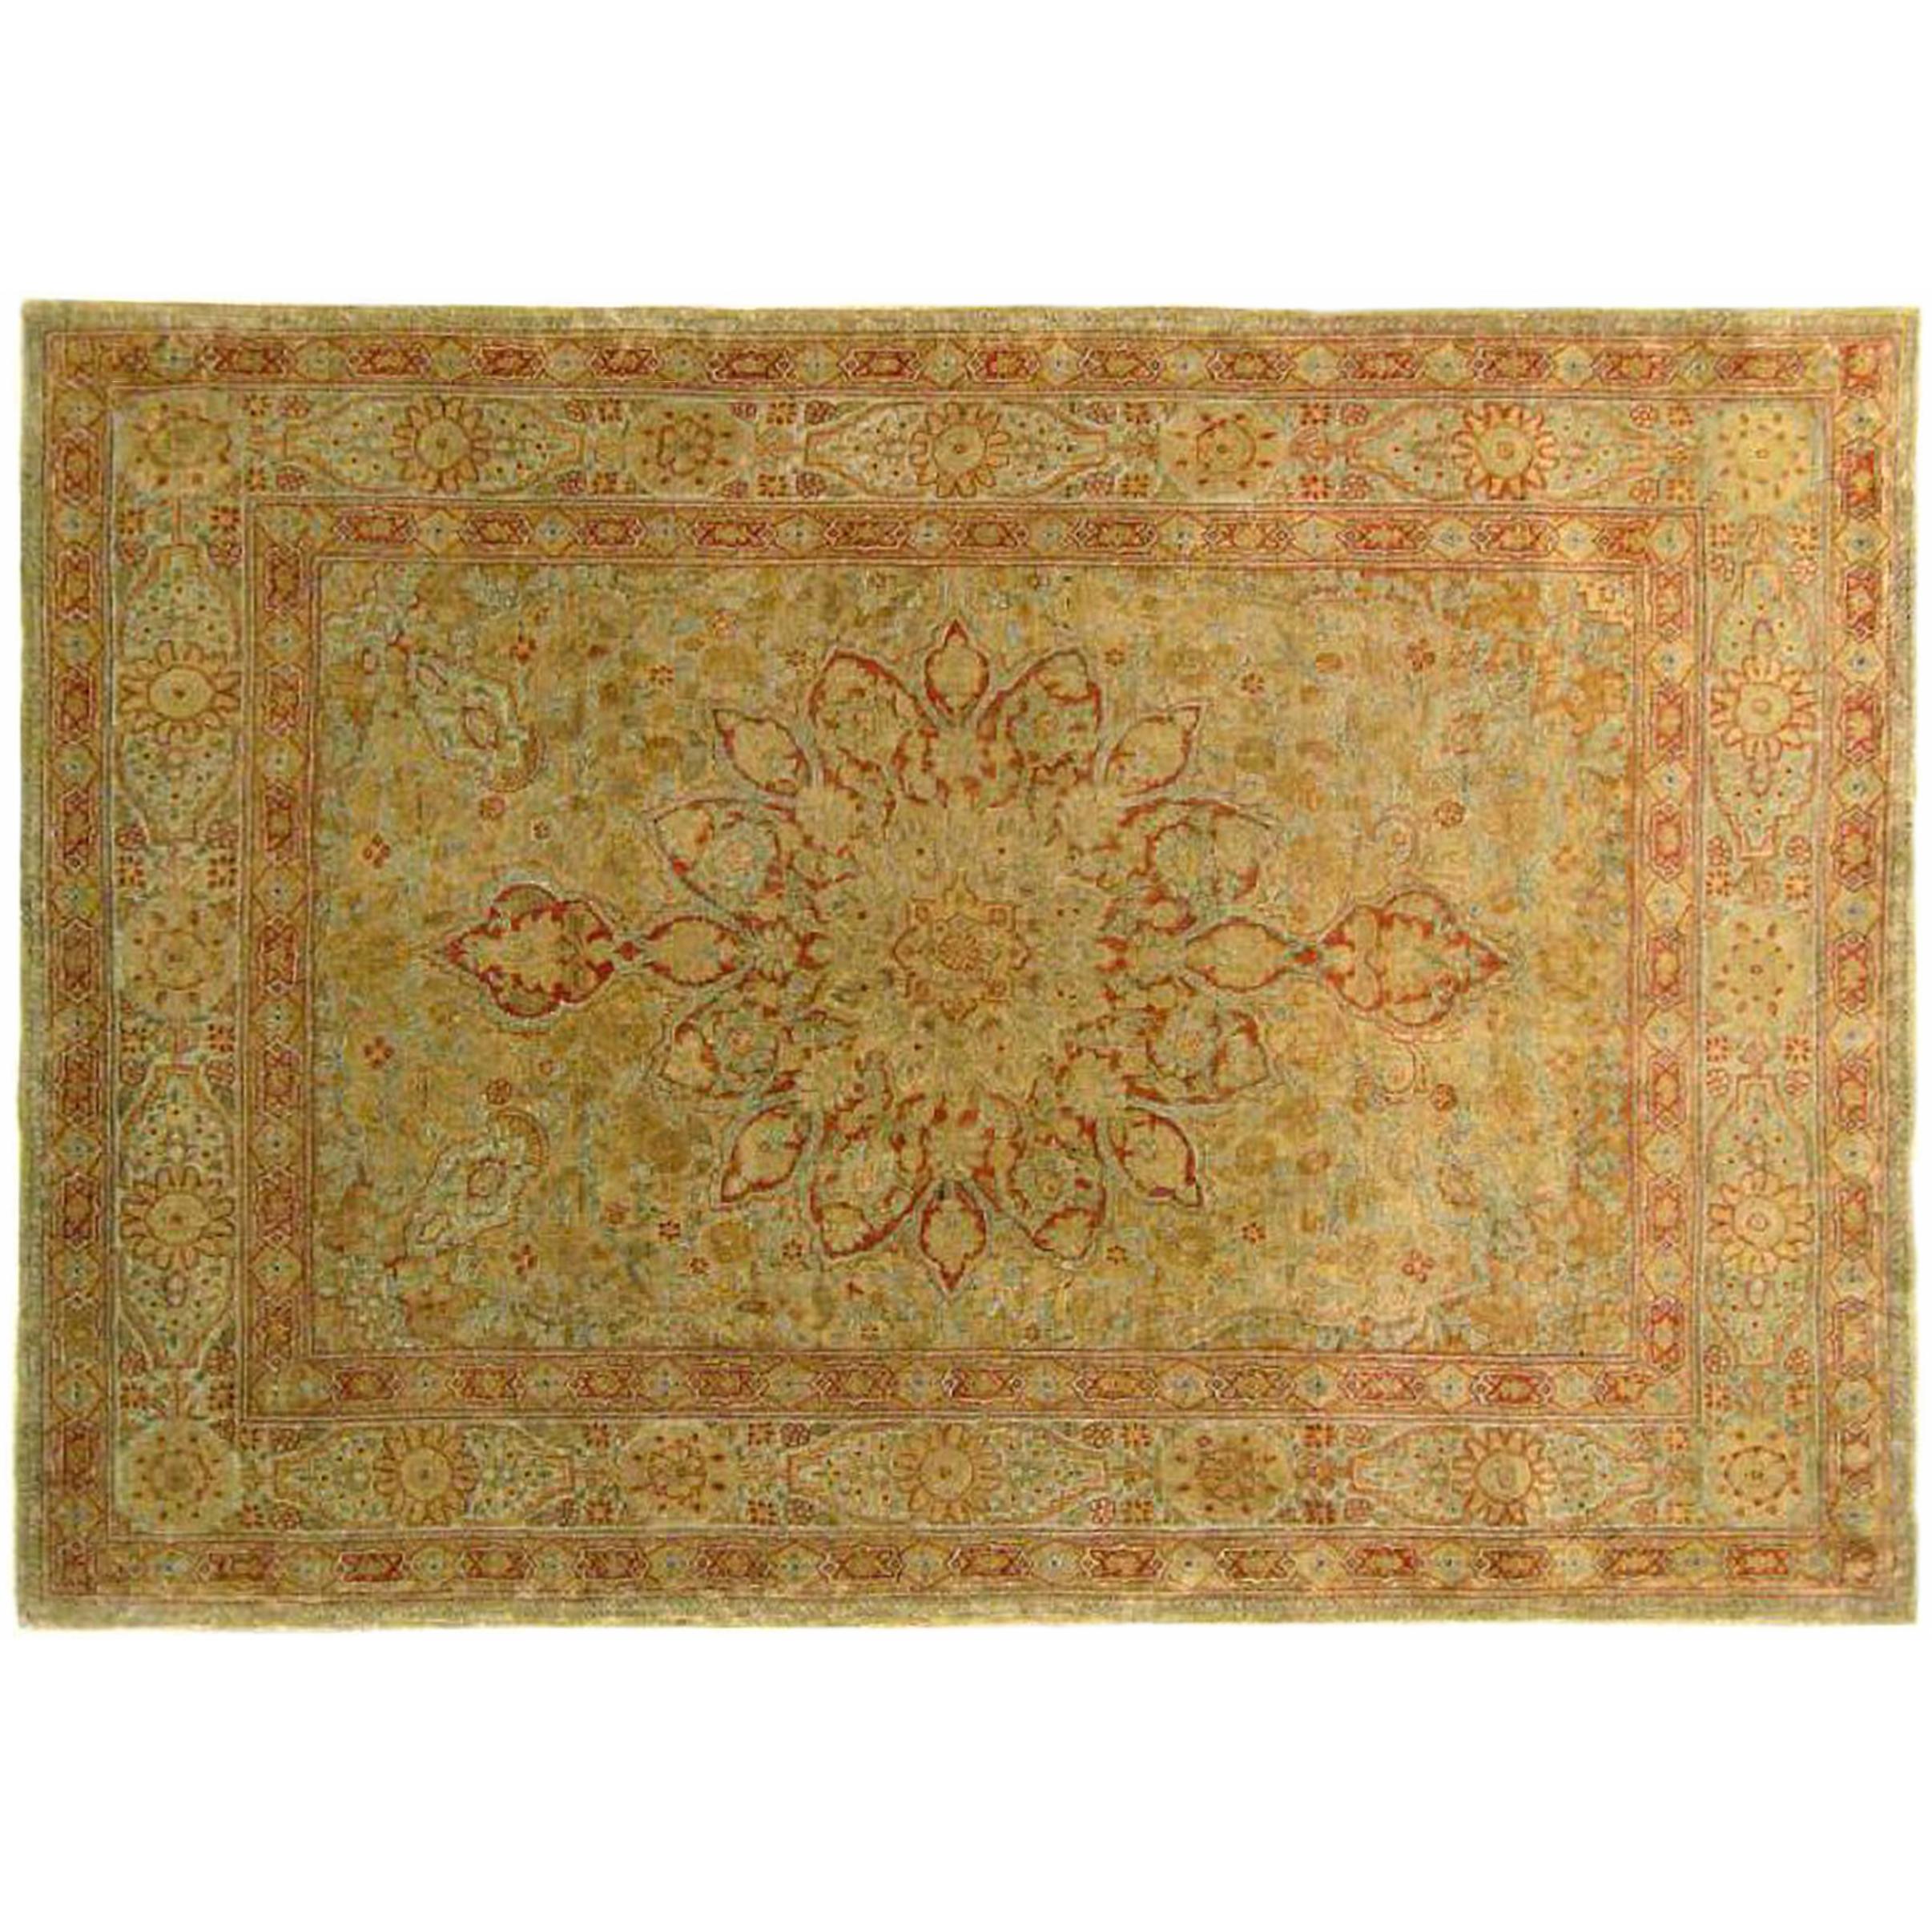 Antique Persian Tabriz Oriental Rug in Small Size with Medallion and Soft Colors